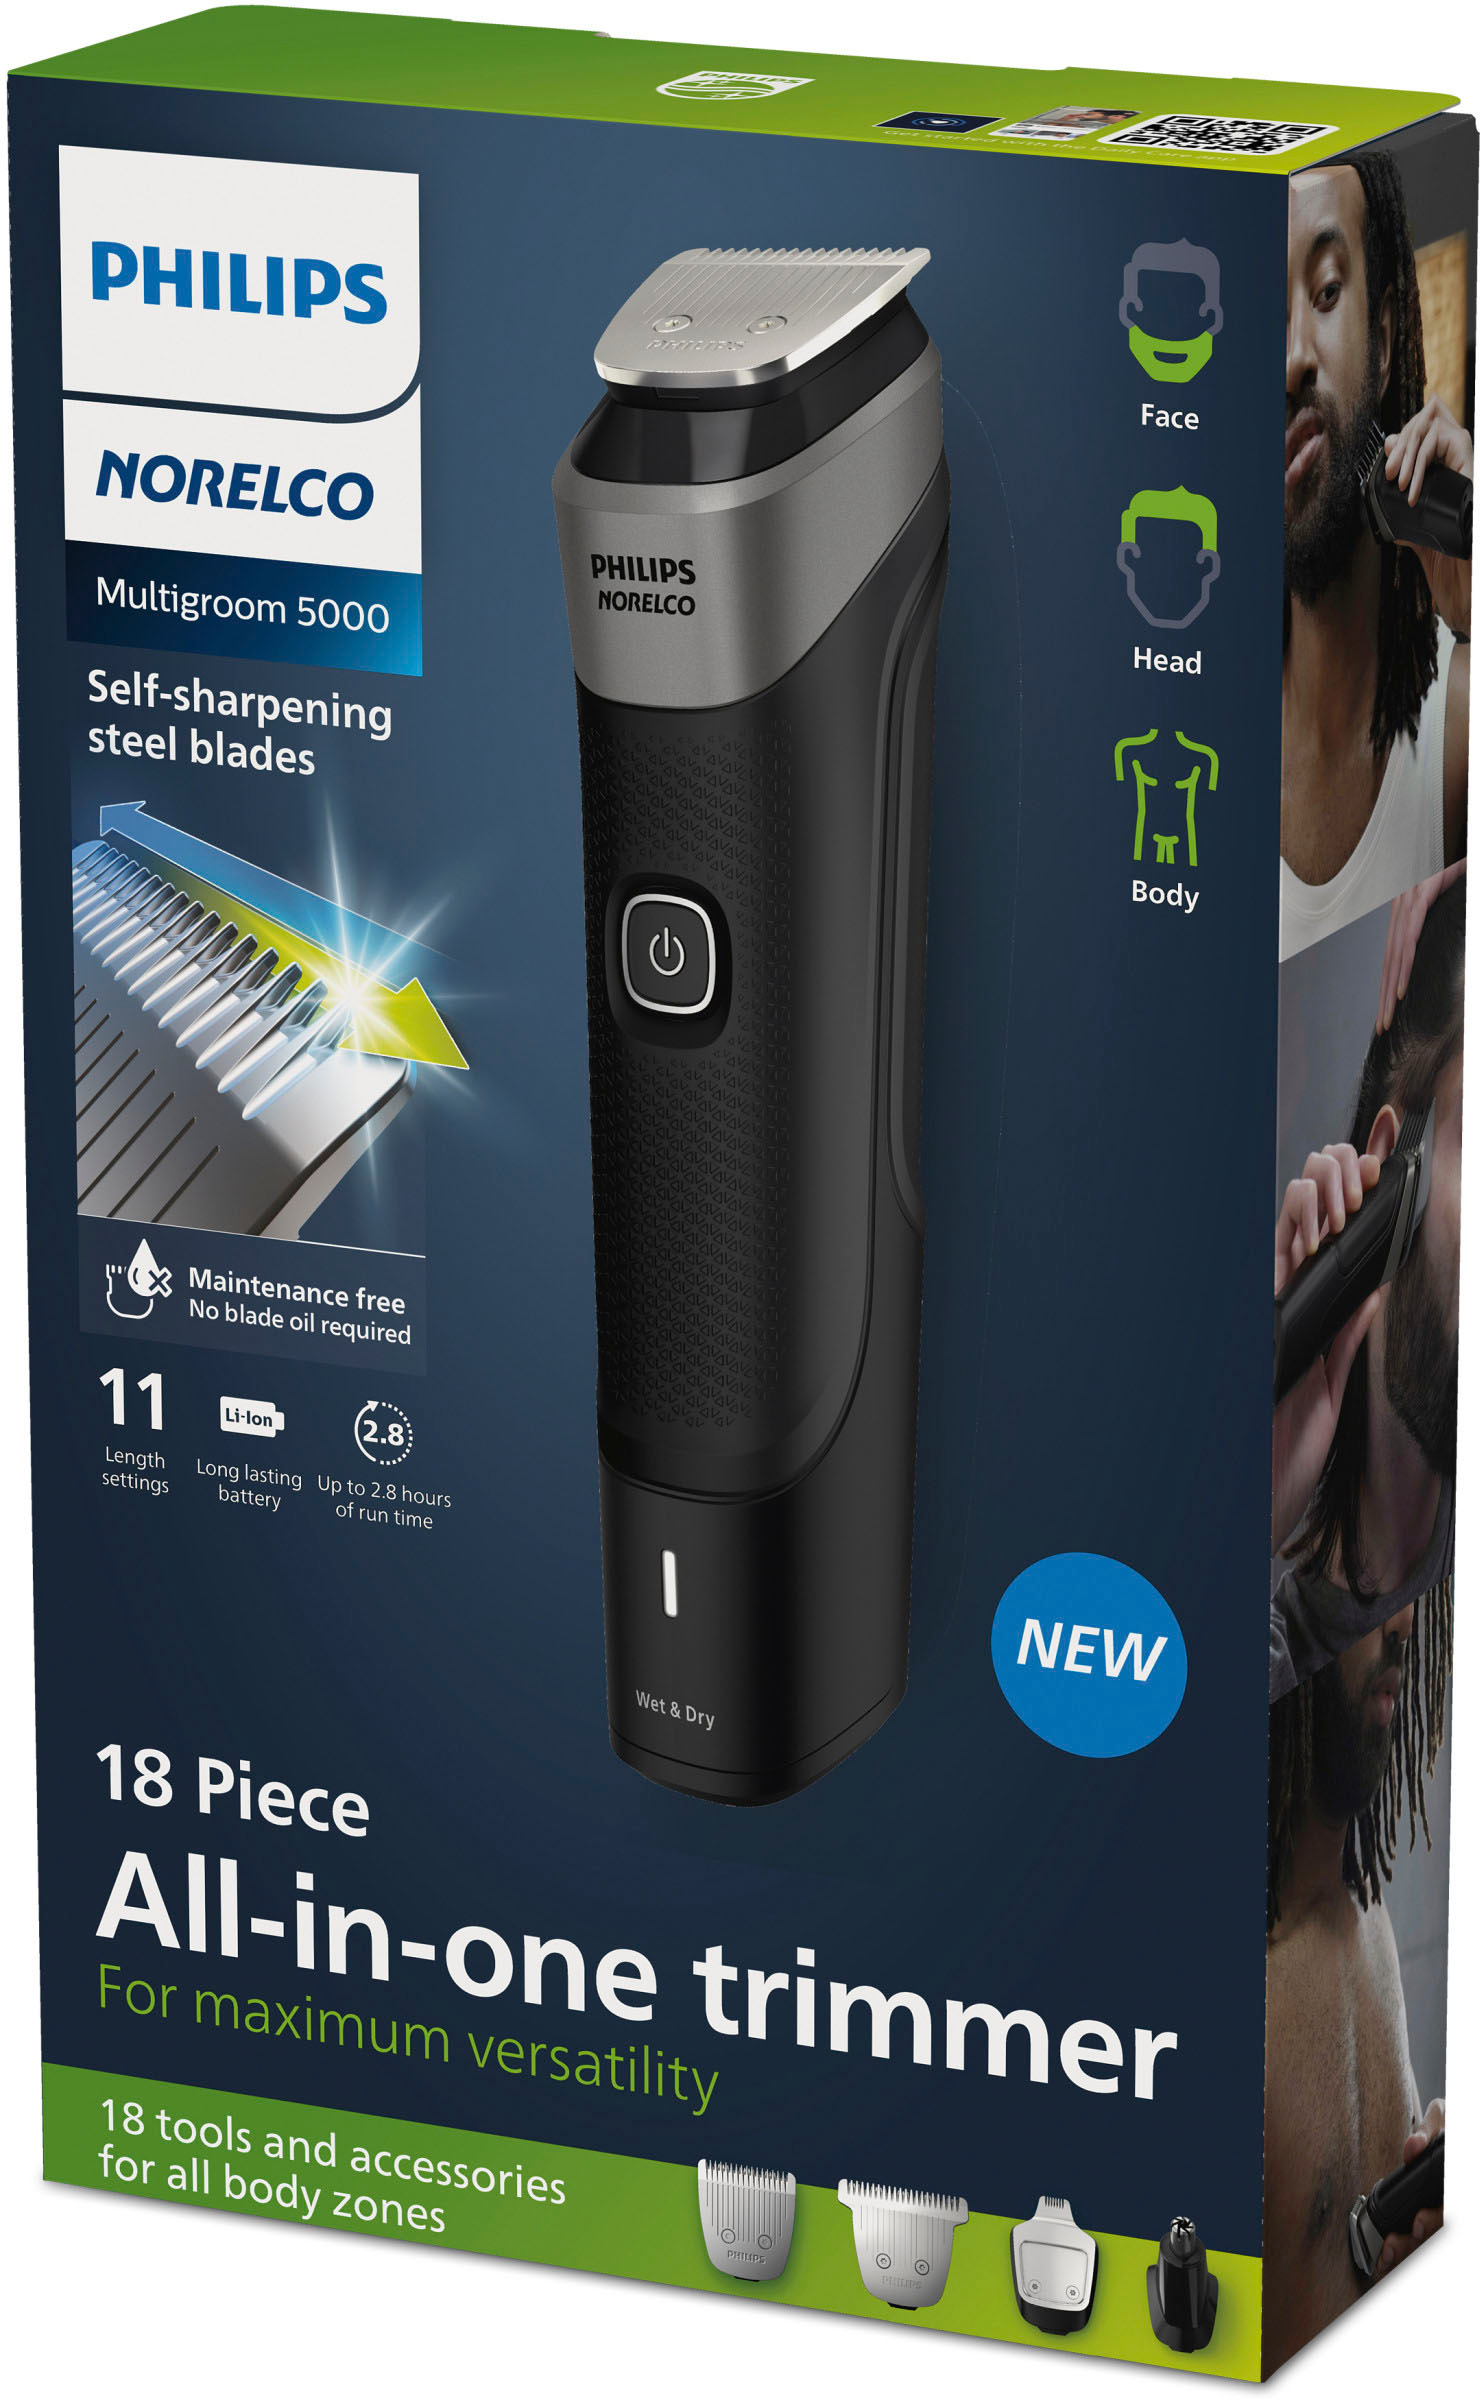 Philips Norelco 5000 18 Piece, Beard Face, Hair, Body Hair Trimmer for Men MG5910/49 Silver MG5910/49 - Best Buy